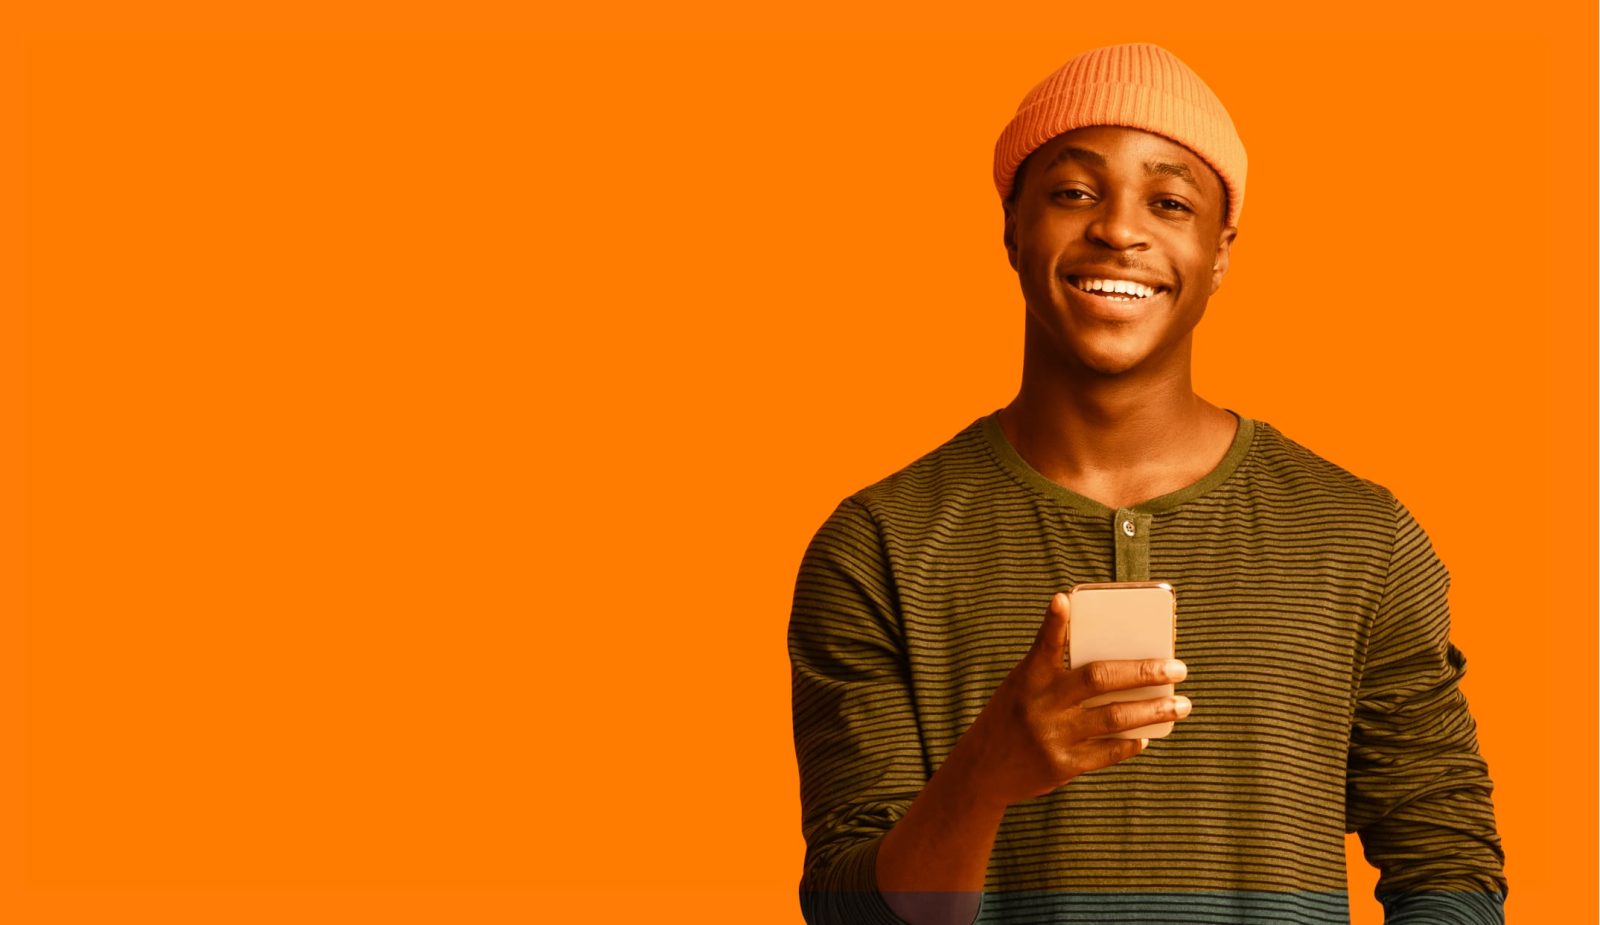 Black man standing, wearing an orange cap and green striped t-shirt, while holding a white cell phone with his right hand and posing smiling